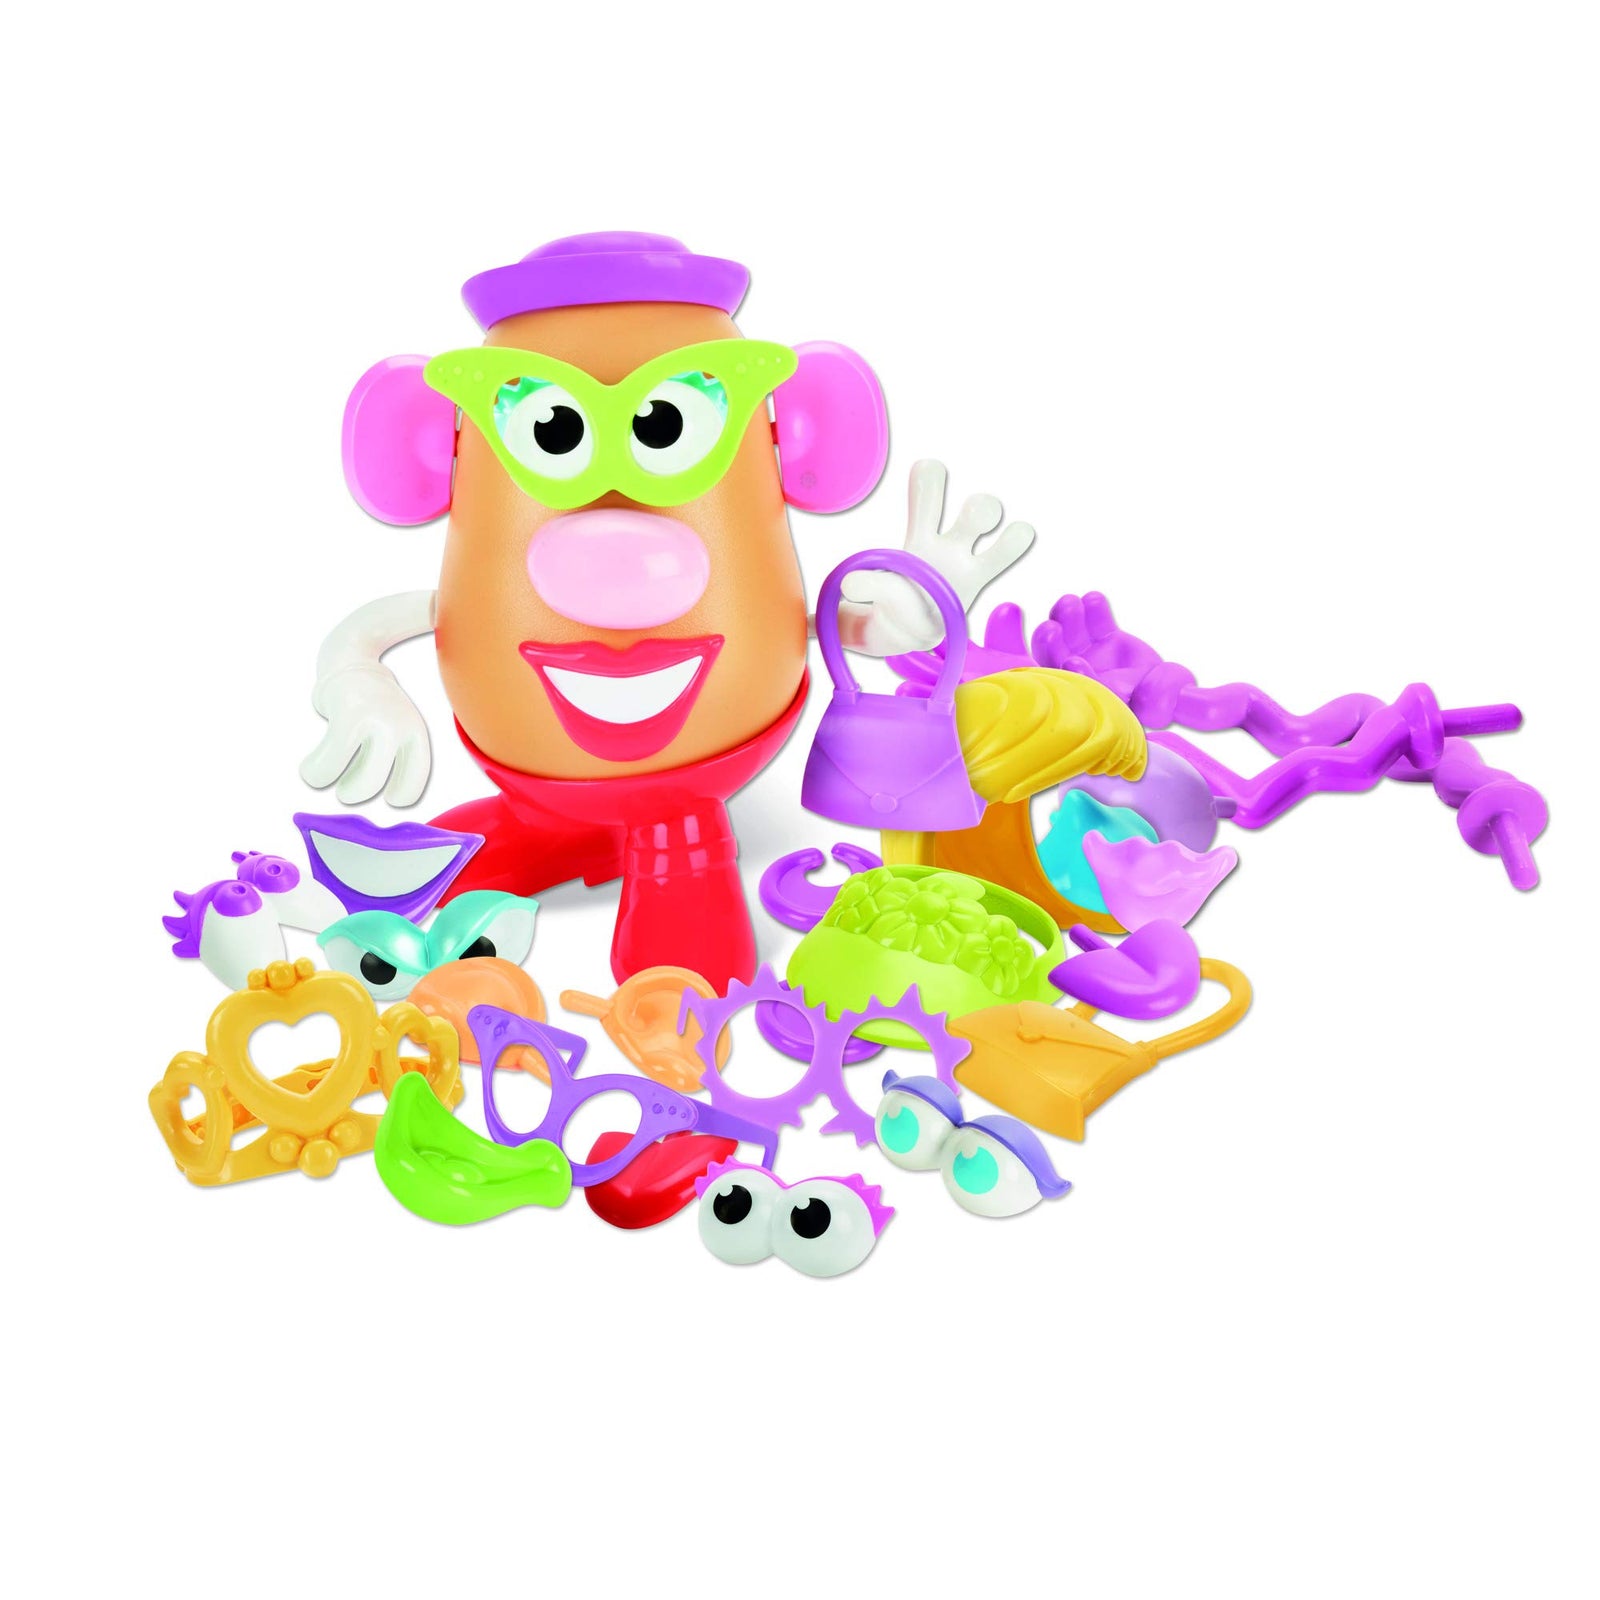 Playskool Mrs. Potato Head Silly Suitcase Parts And Pieces Toddler Toy For Kids (Amazon Exclusive)